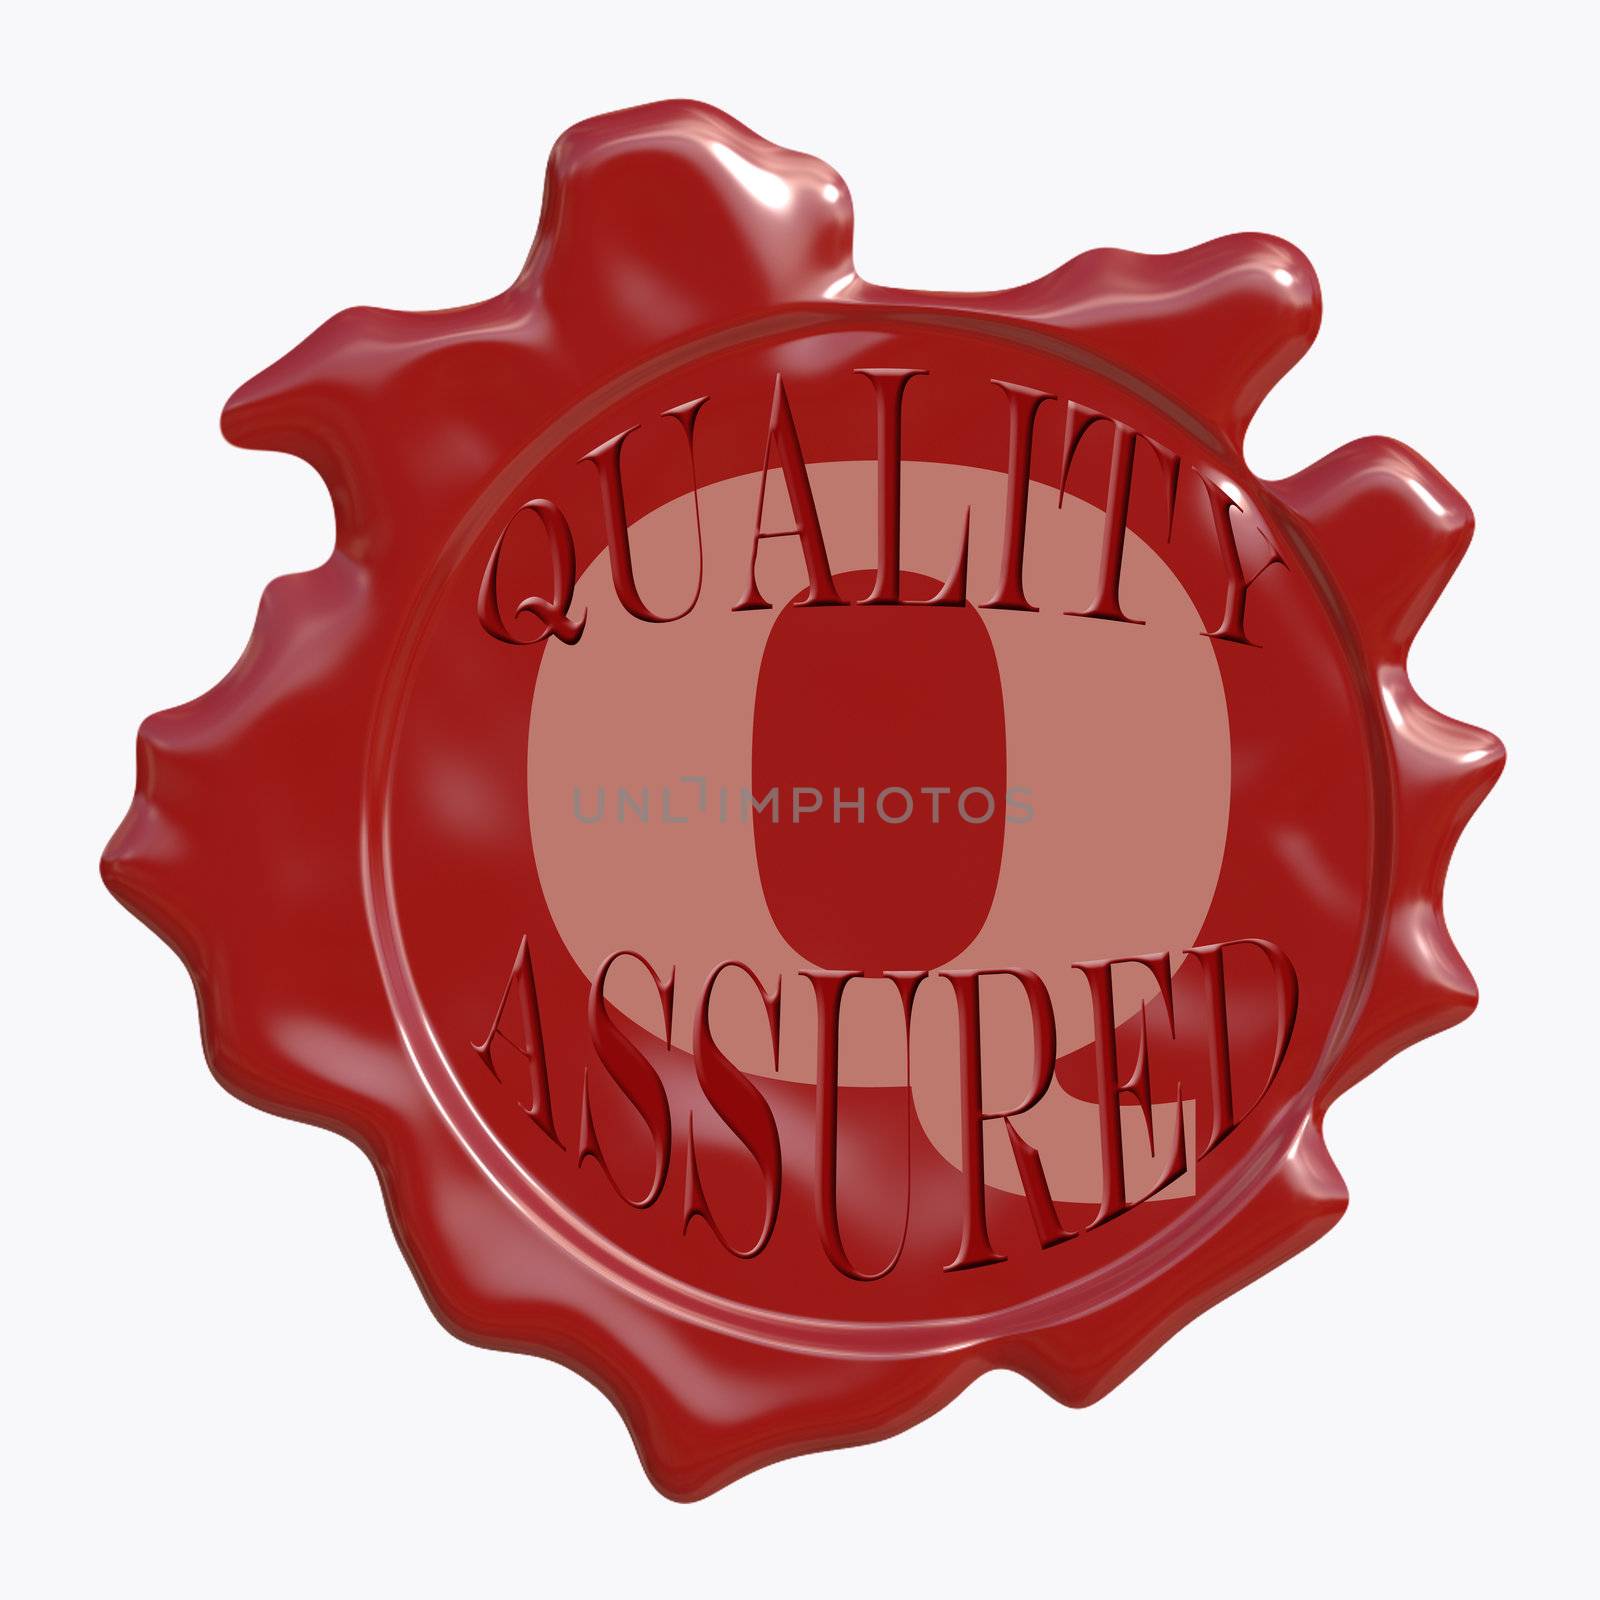 quality assured wax seal in maroon red on a white background